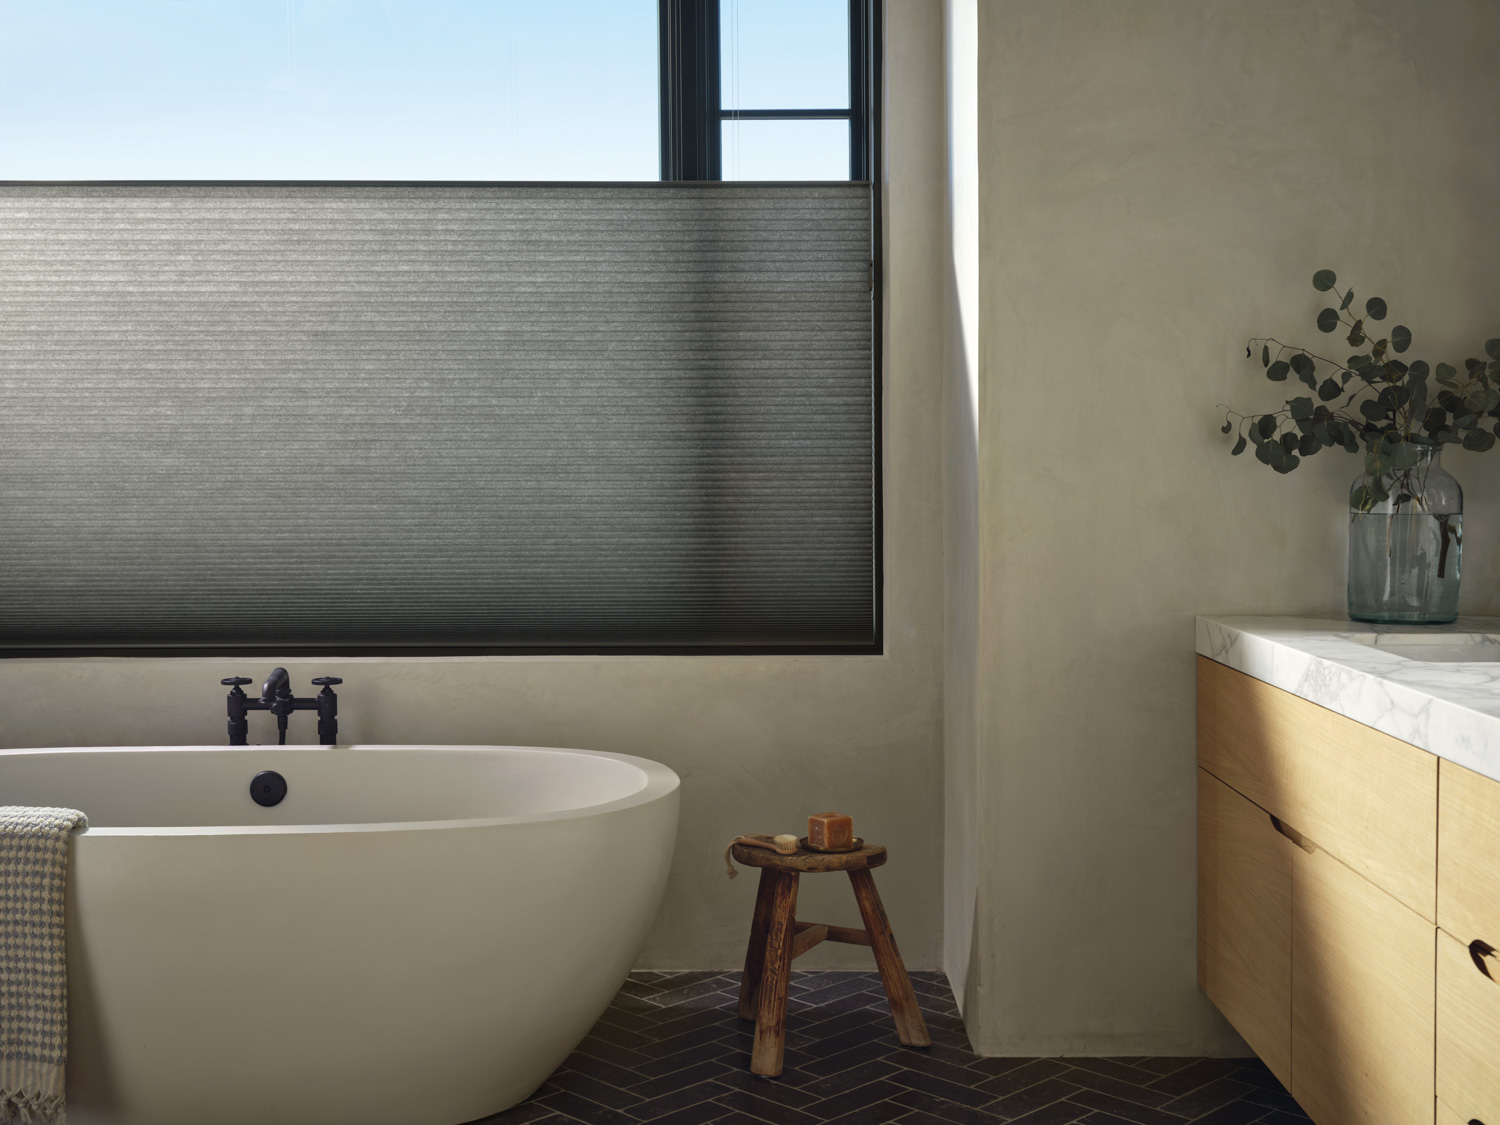 A bathroom with a window and a bathtub. The Hunter Douglas Duette® Honeycomb Shades add elegance and privacy.